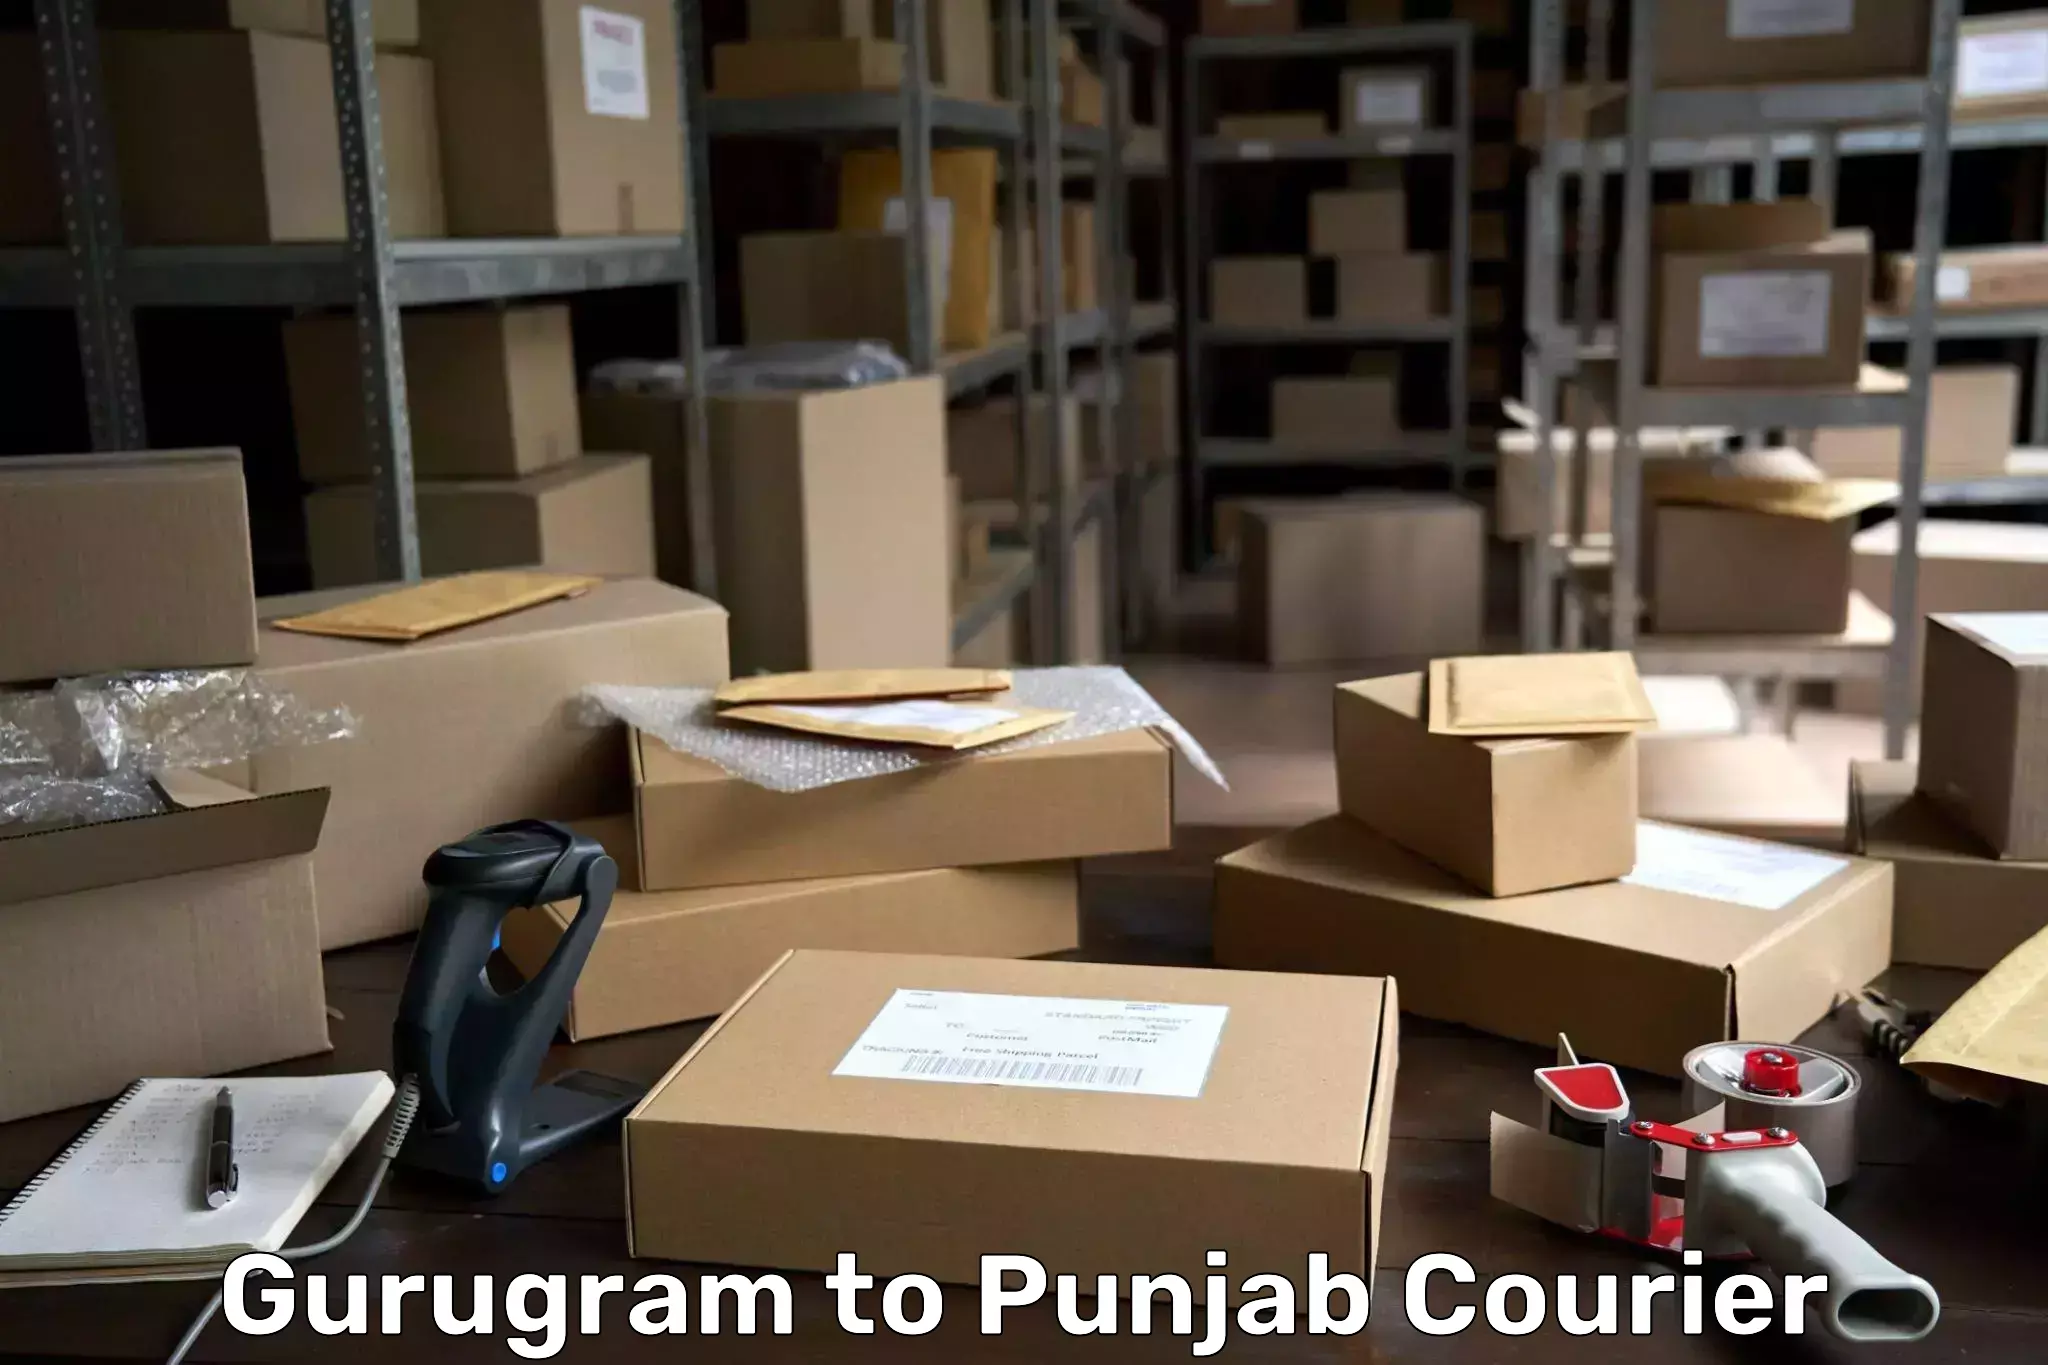 Business delivery service Gurugram to Punjab